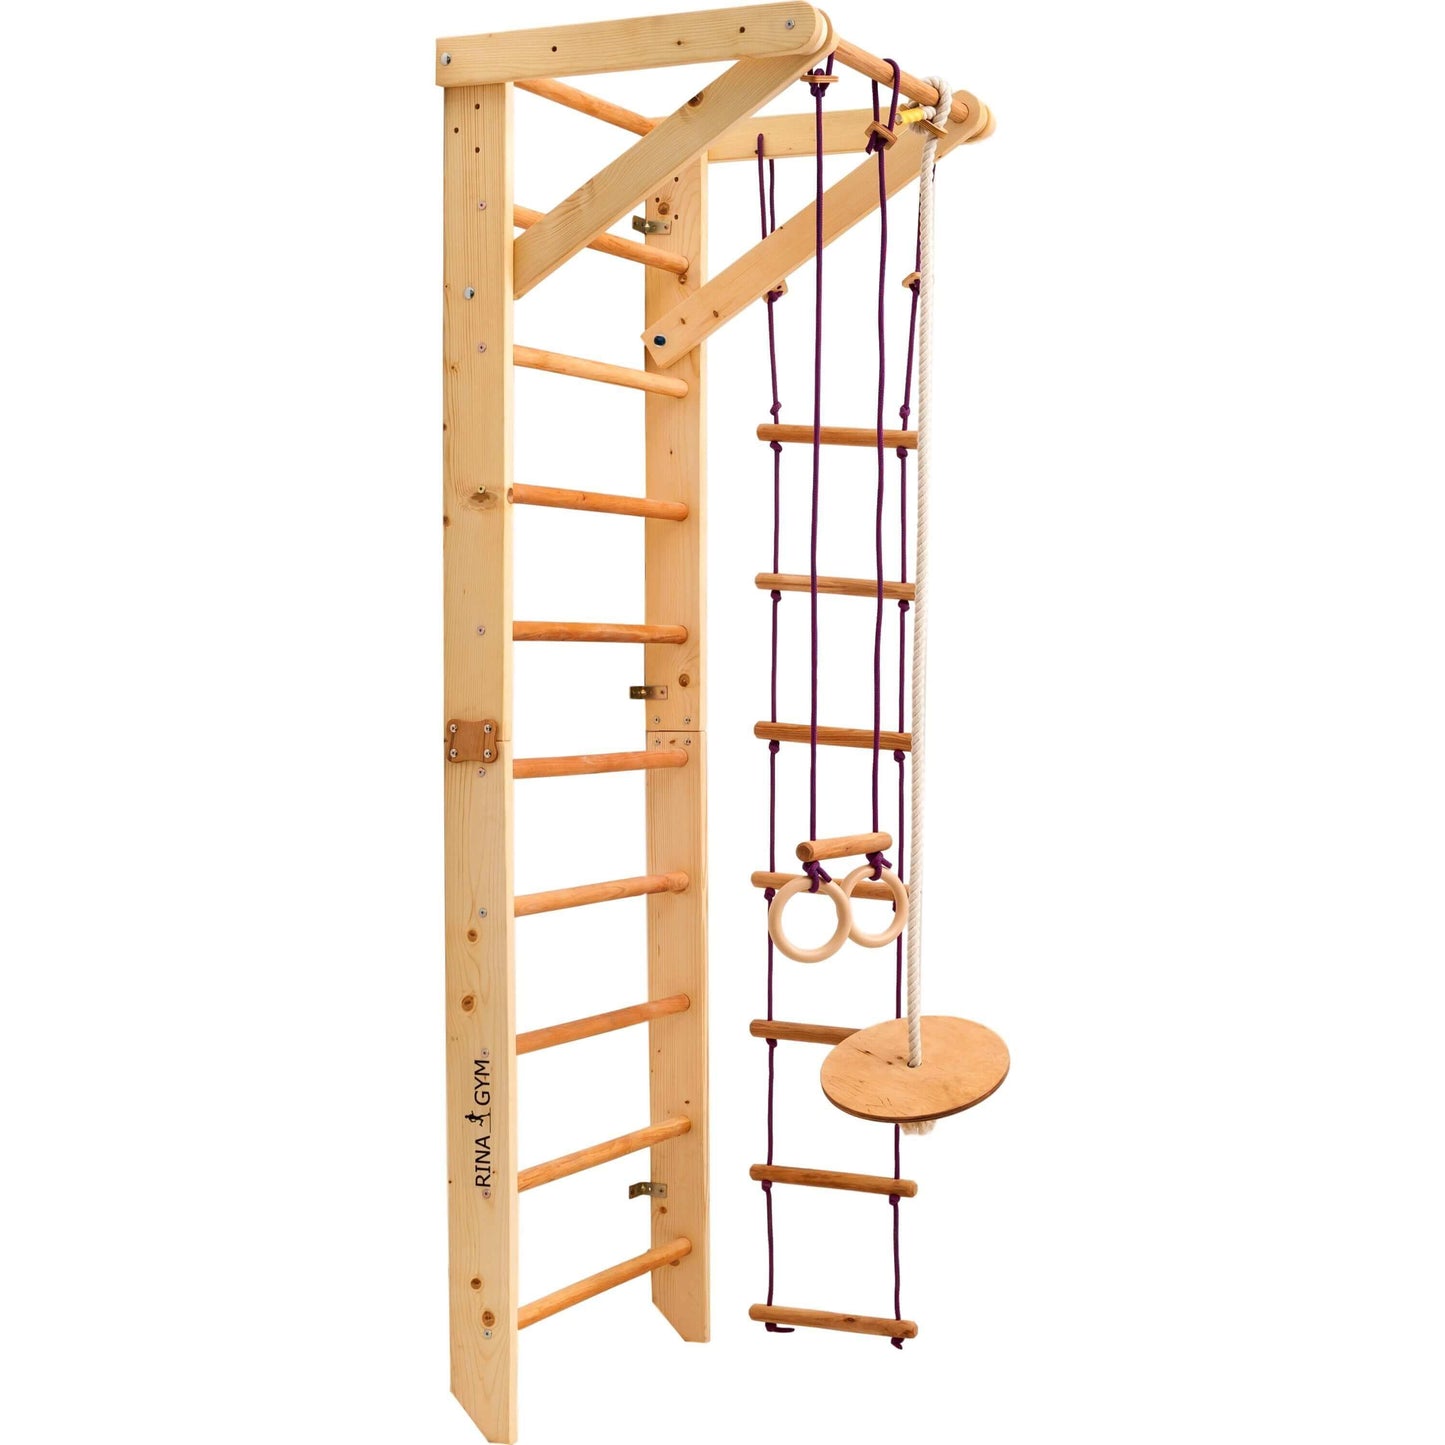 Climbing wall SPORT2 for children and young people, untreated wood